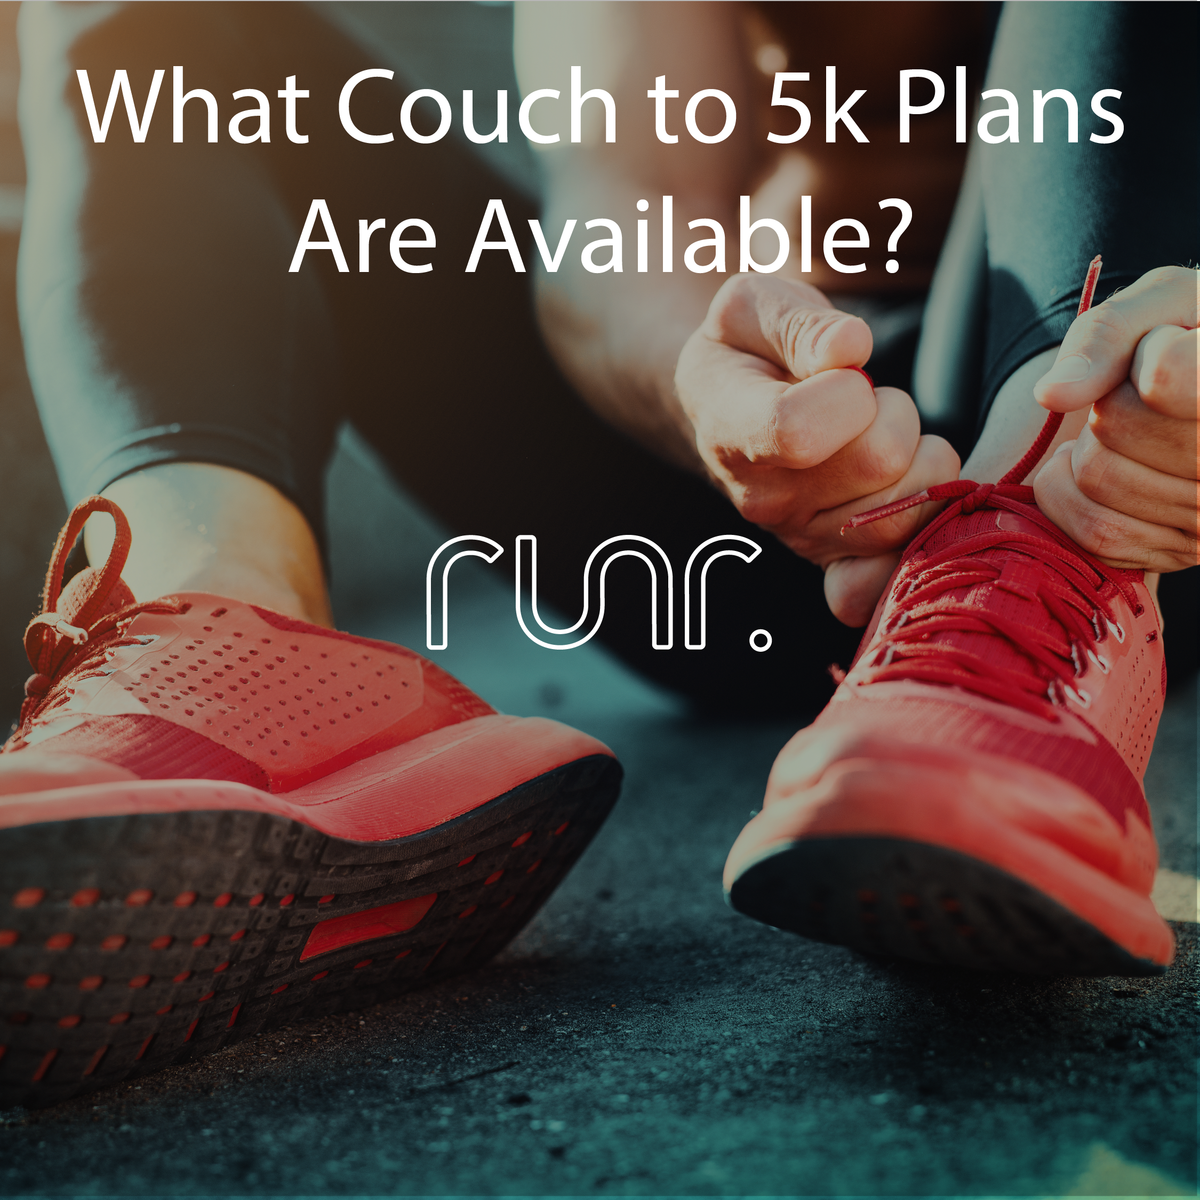 What Couch to 5k Plans Are Available?